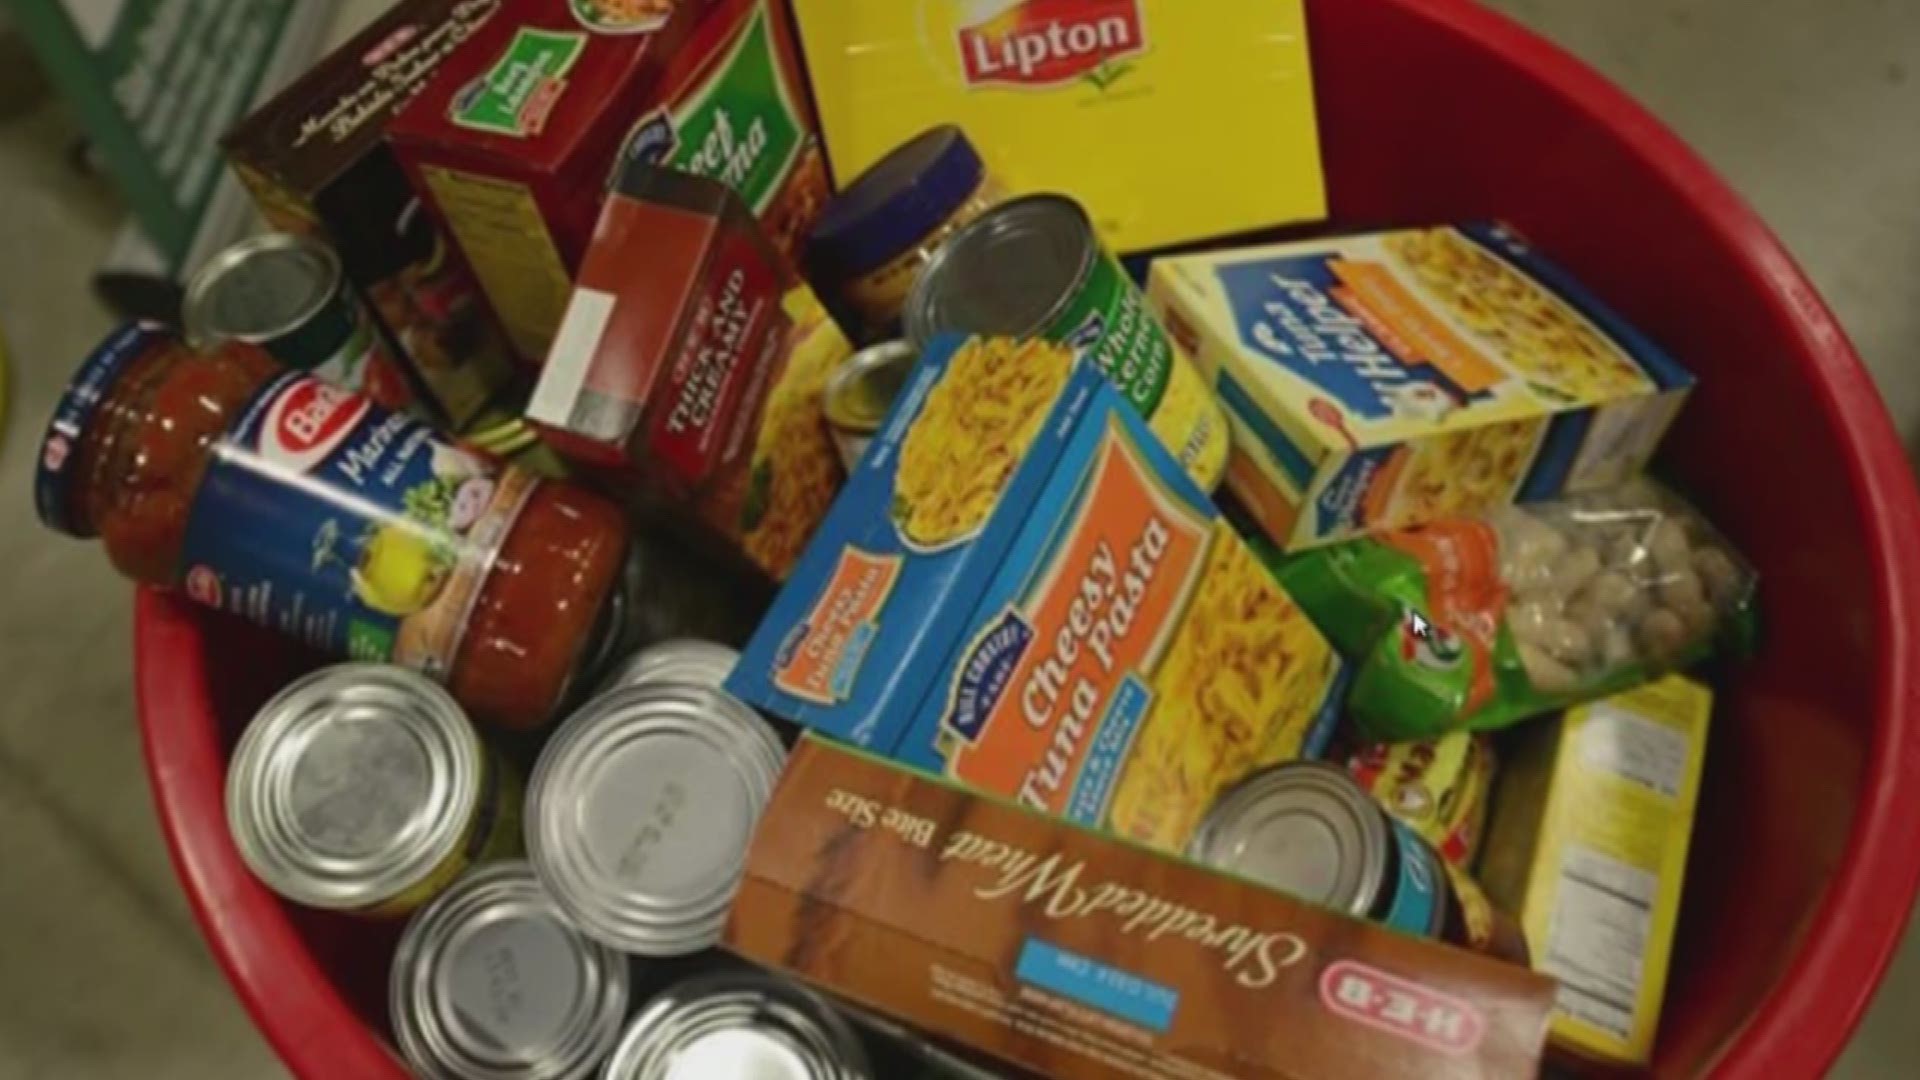 The fourth year of the Summer Million Meals for Kids kicked off on Thursday afternoon. It's a partnership between KENS 5 and the San Antonio Food Bank.